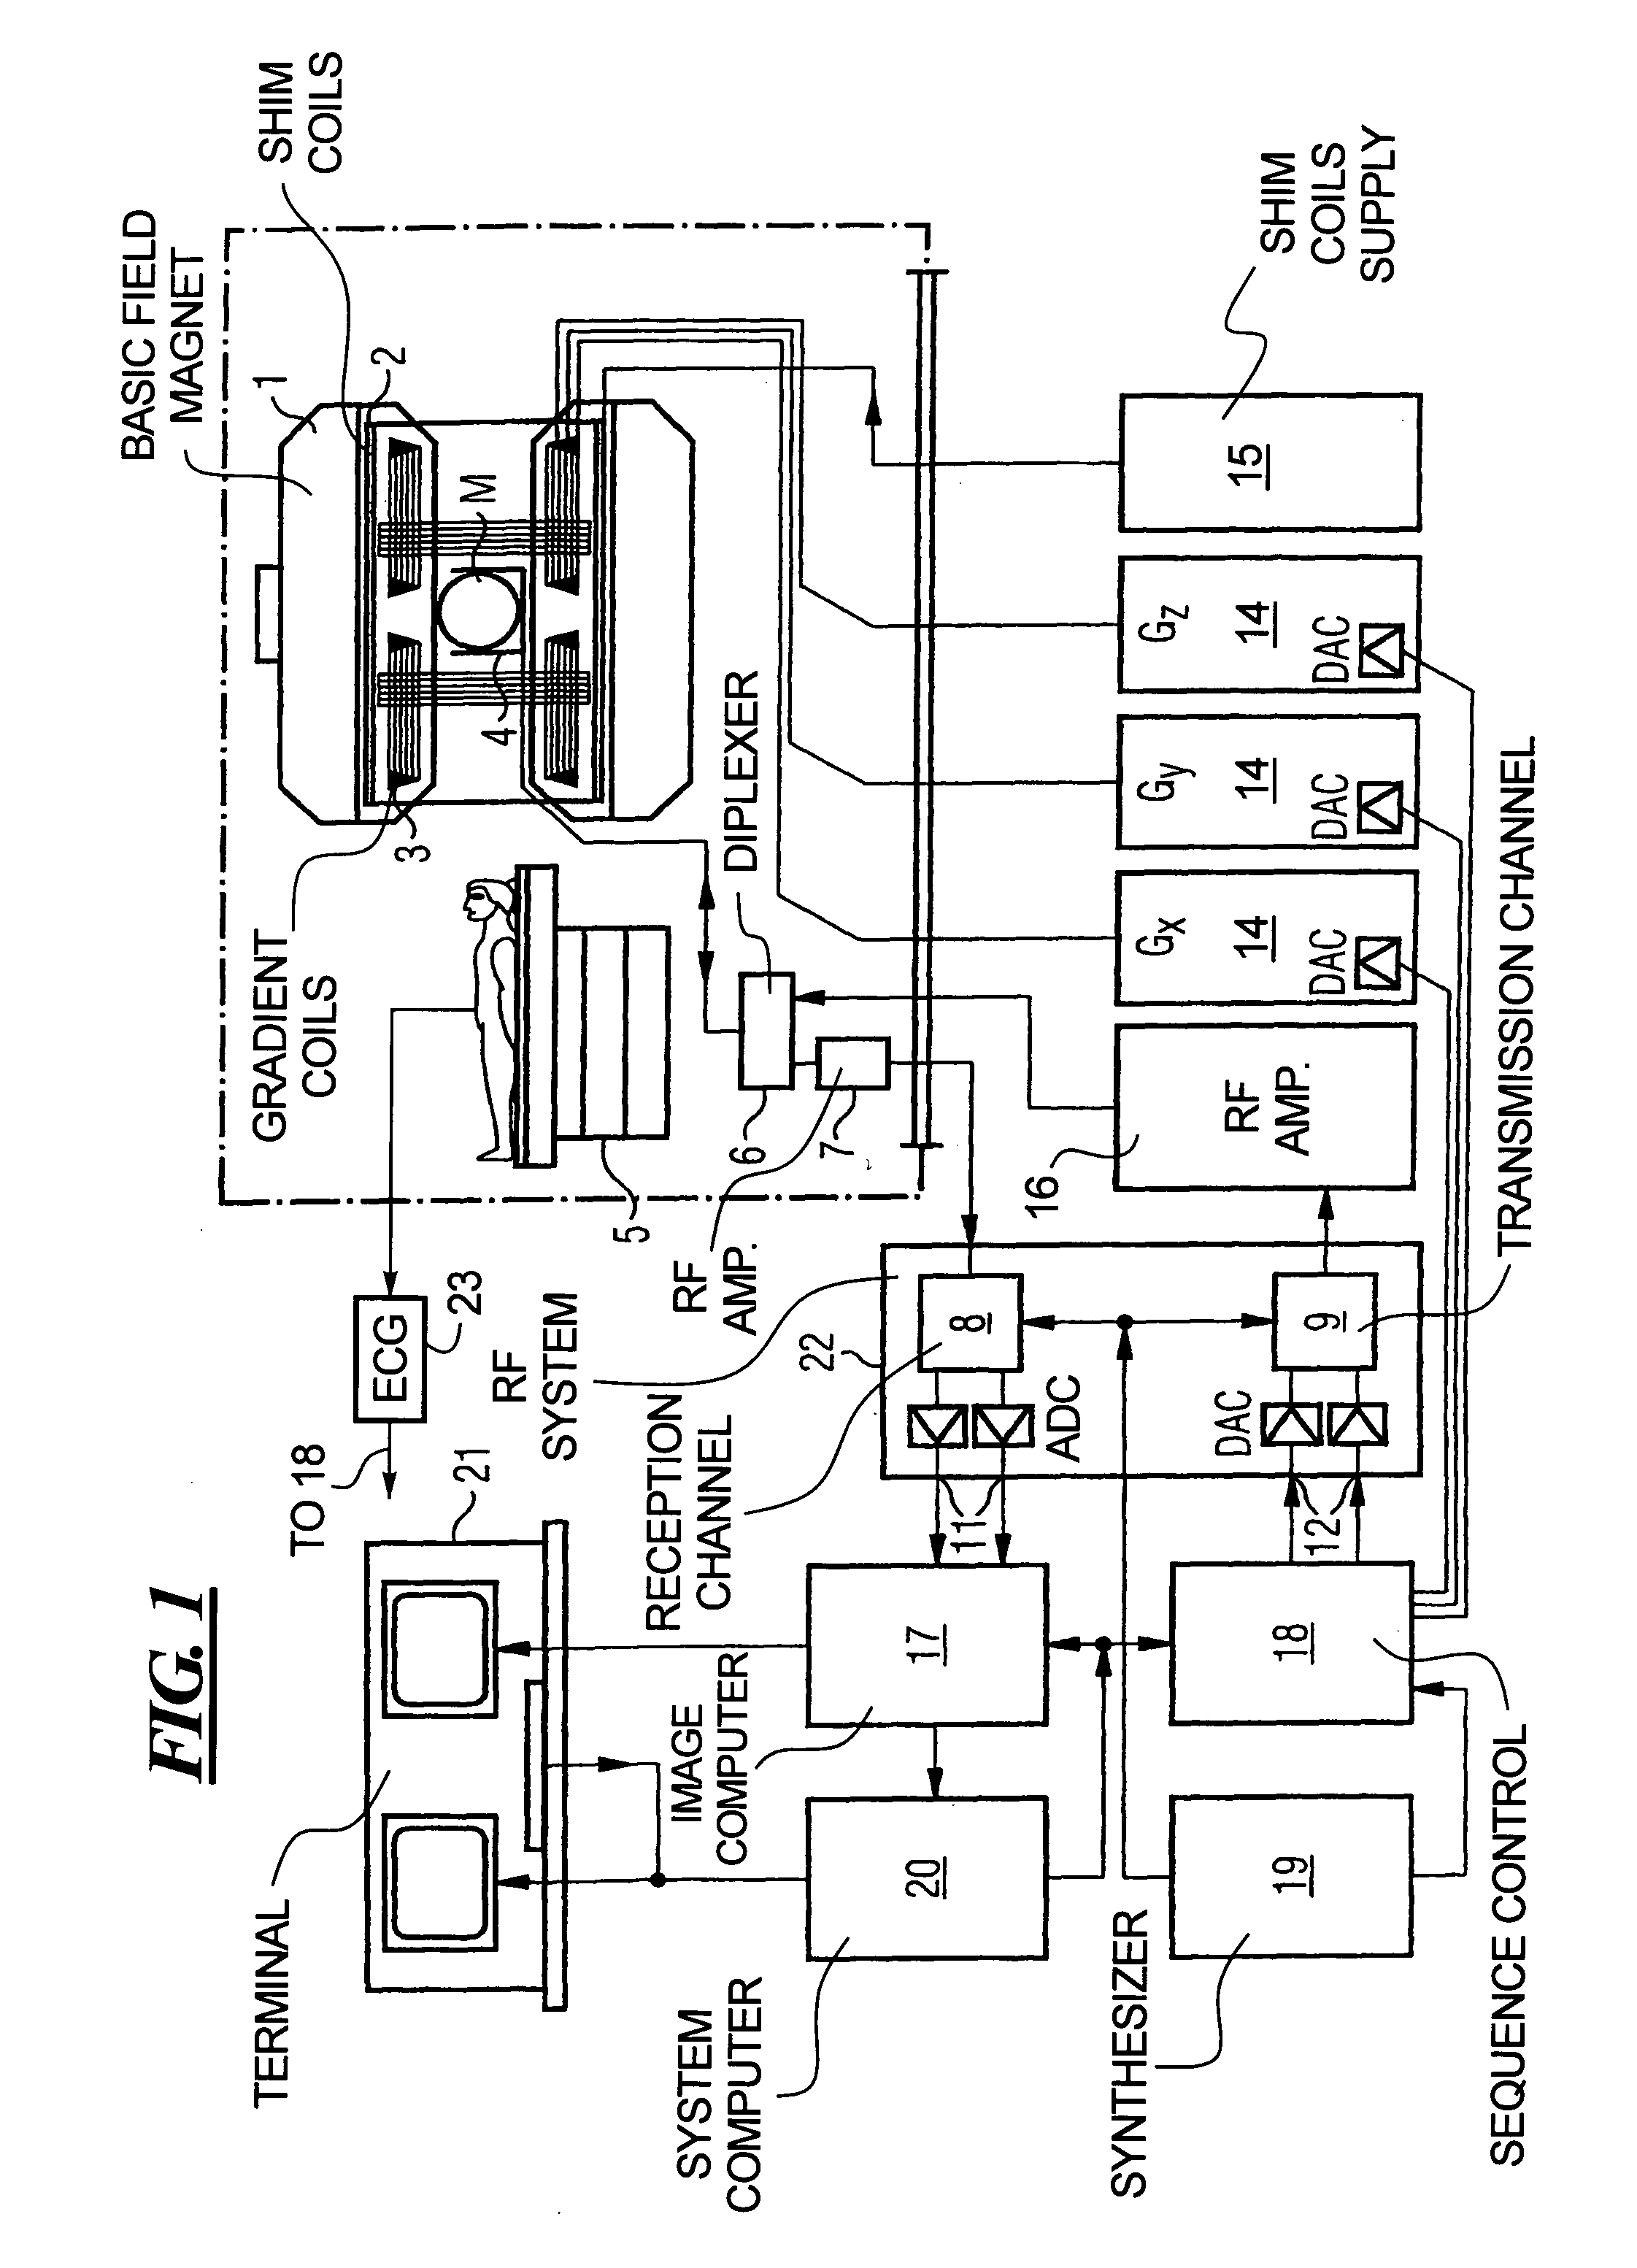 Magnetic resonance imaging method and apparatus with non-selective excitation of the examination subject